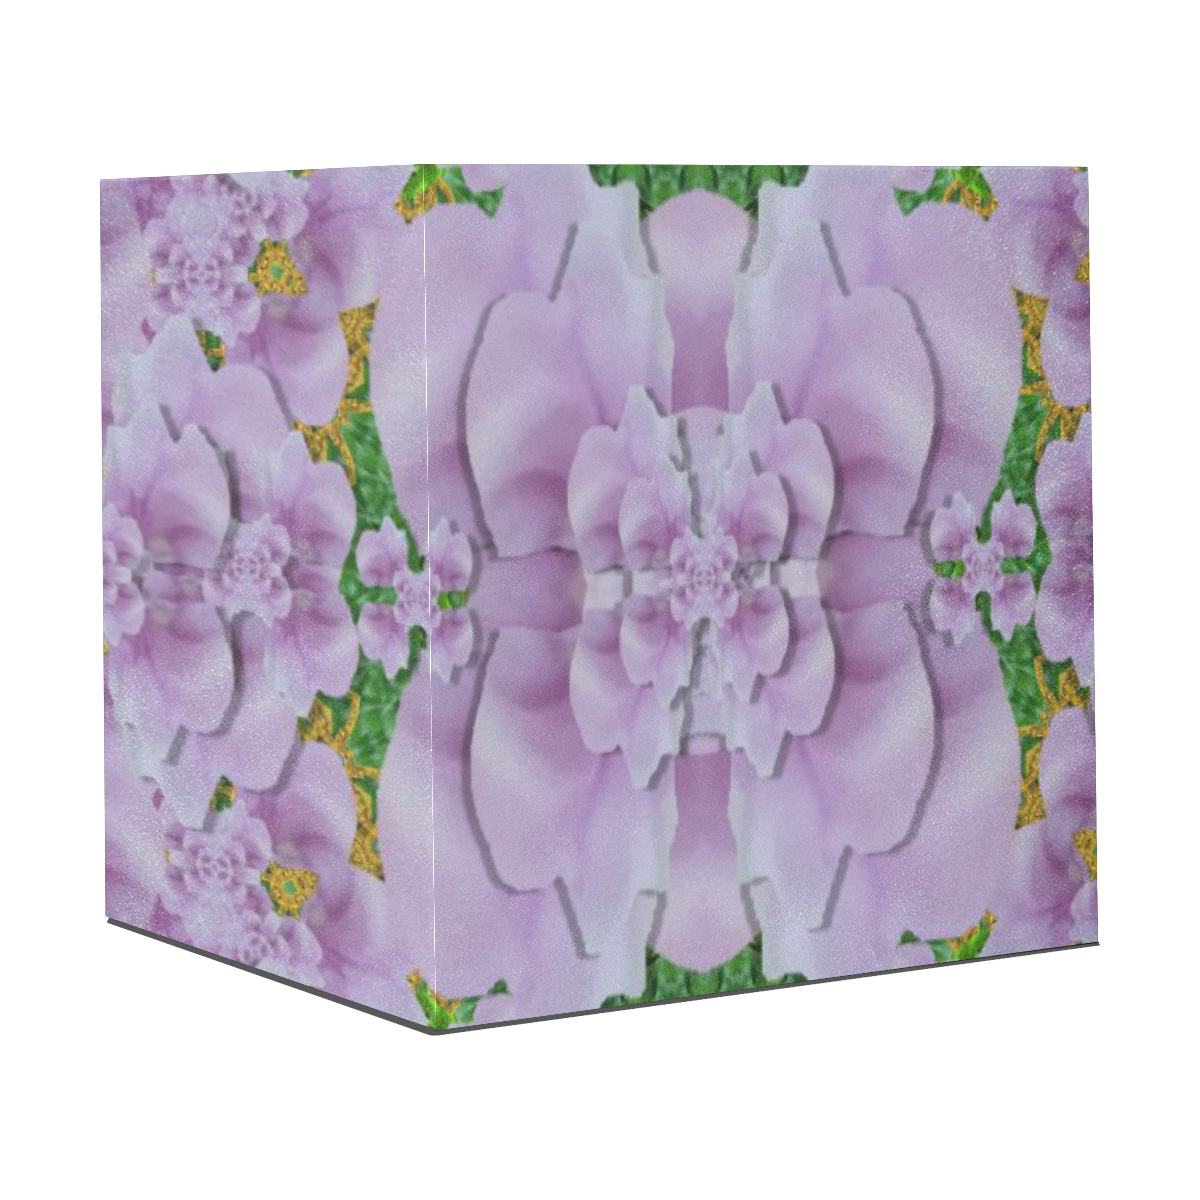 fauna flowers in gold and fern ornate Gift Wrapping Paper 58"x 23" (3 Rolls)